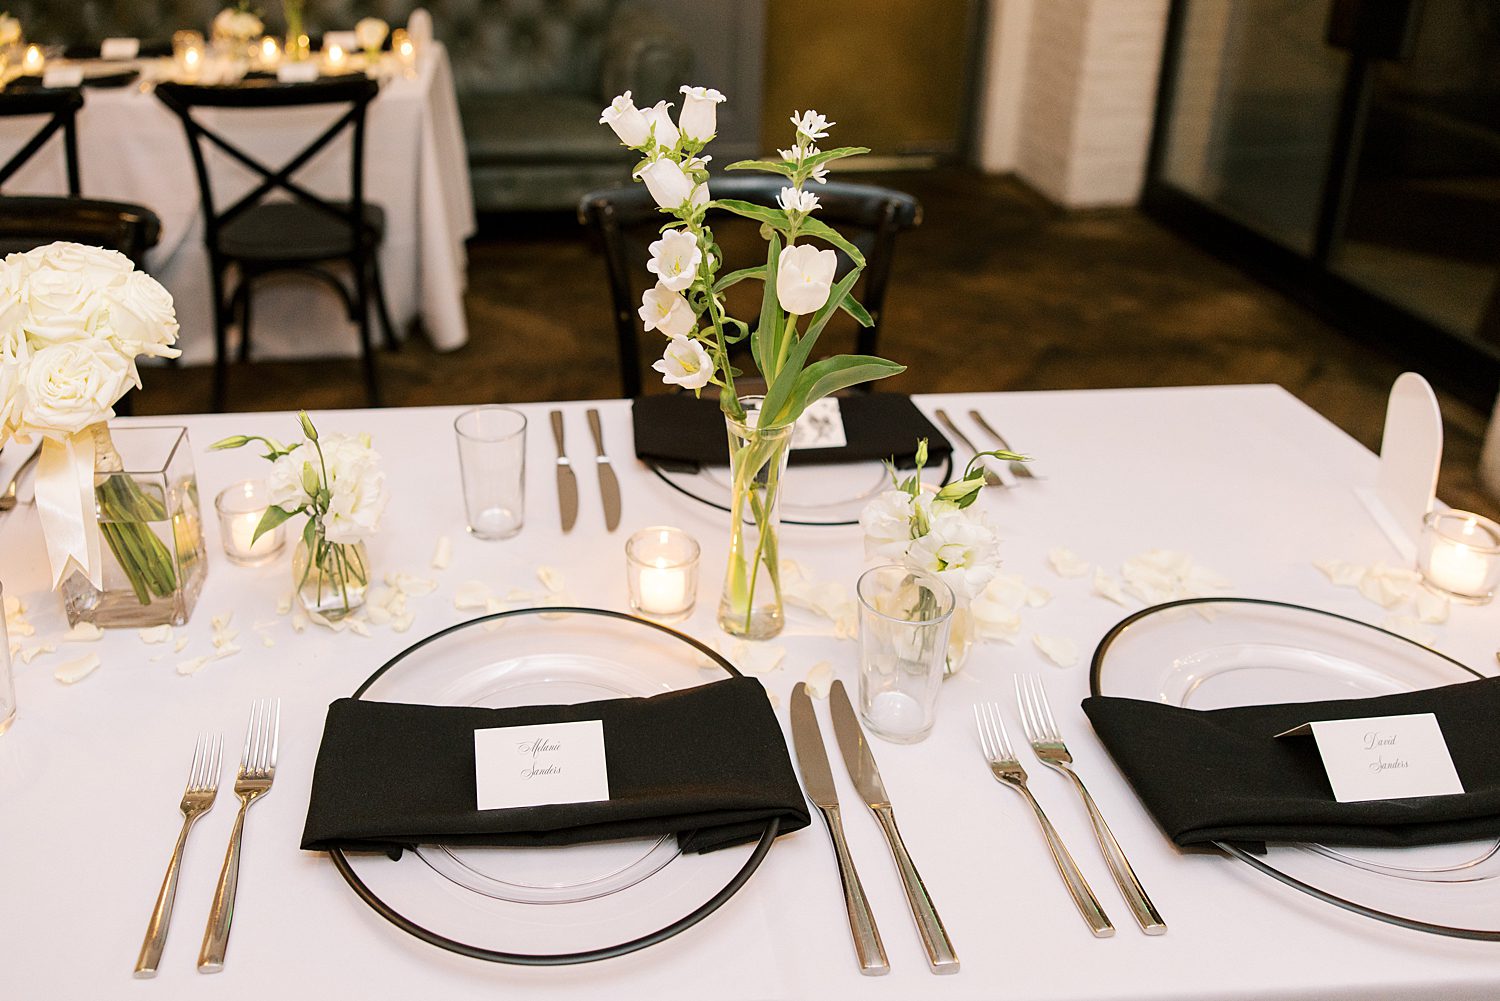 black and white place settings for elegant wedding reception at the Oxford Exchange